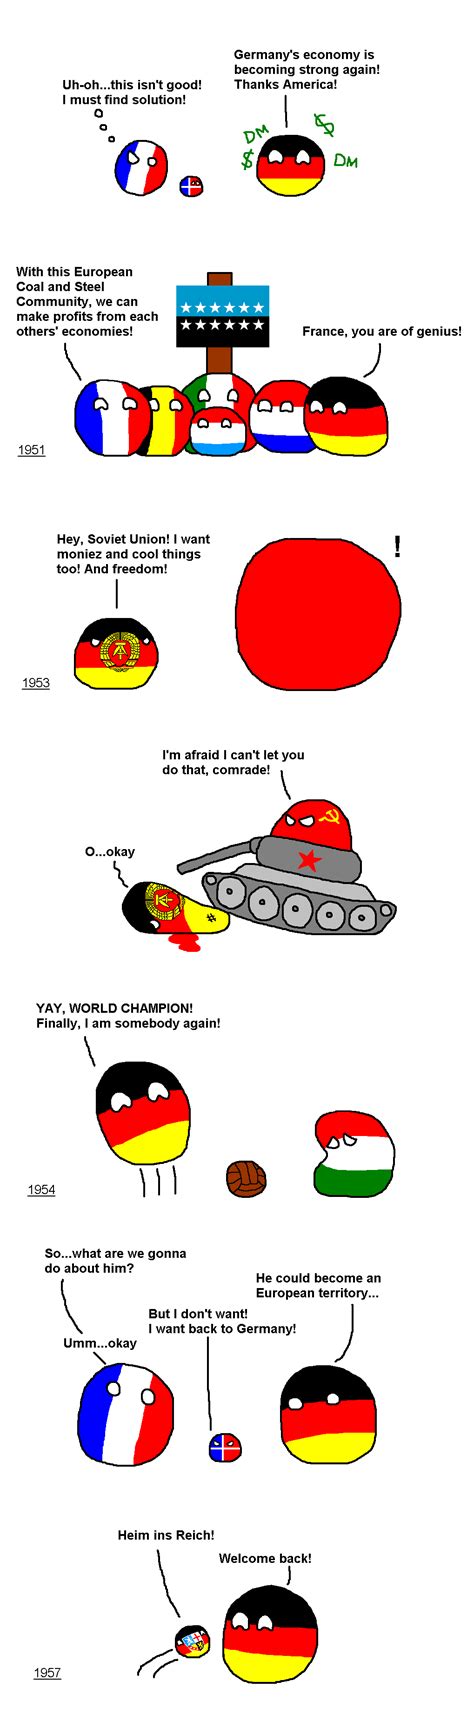 Polandball, also known as countryballs, is an art style occasionally used in online comics, in which countries are typically personified as spherical characters decorated with their country's flag. German History 2 | Polandball | Know Your Meme